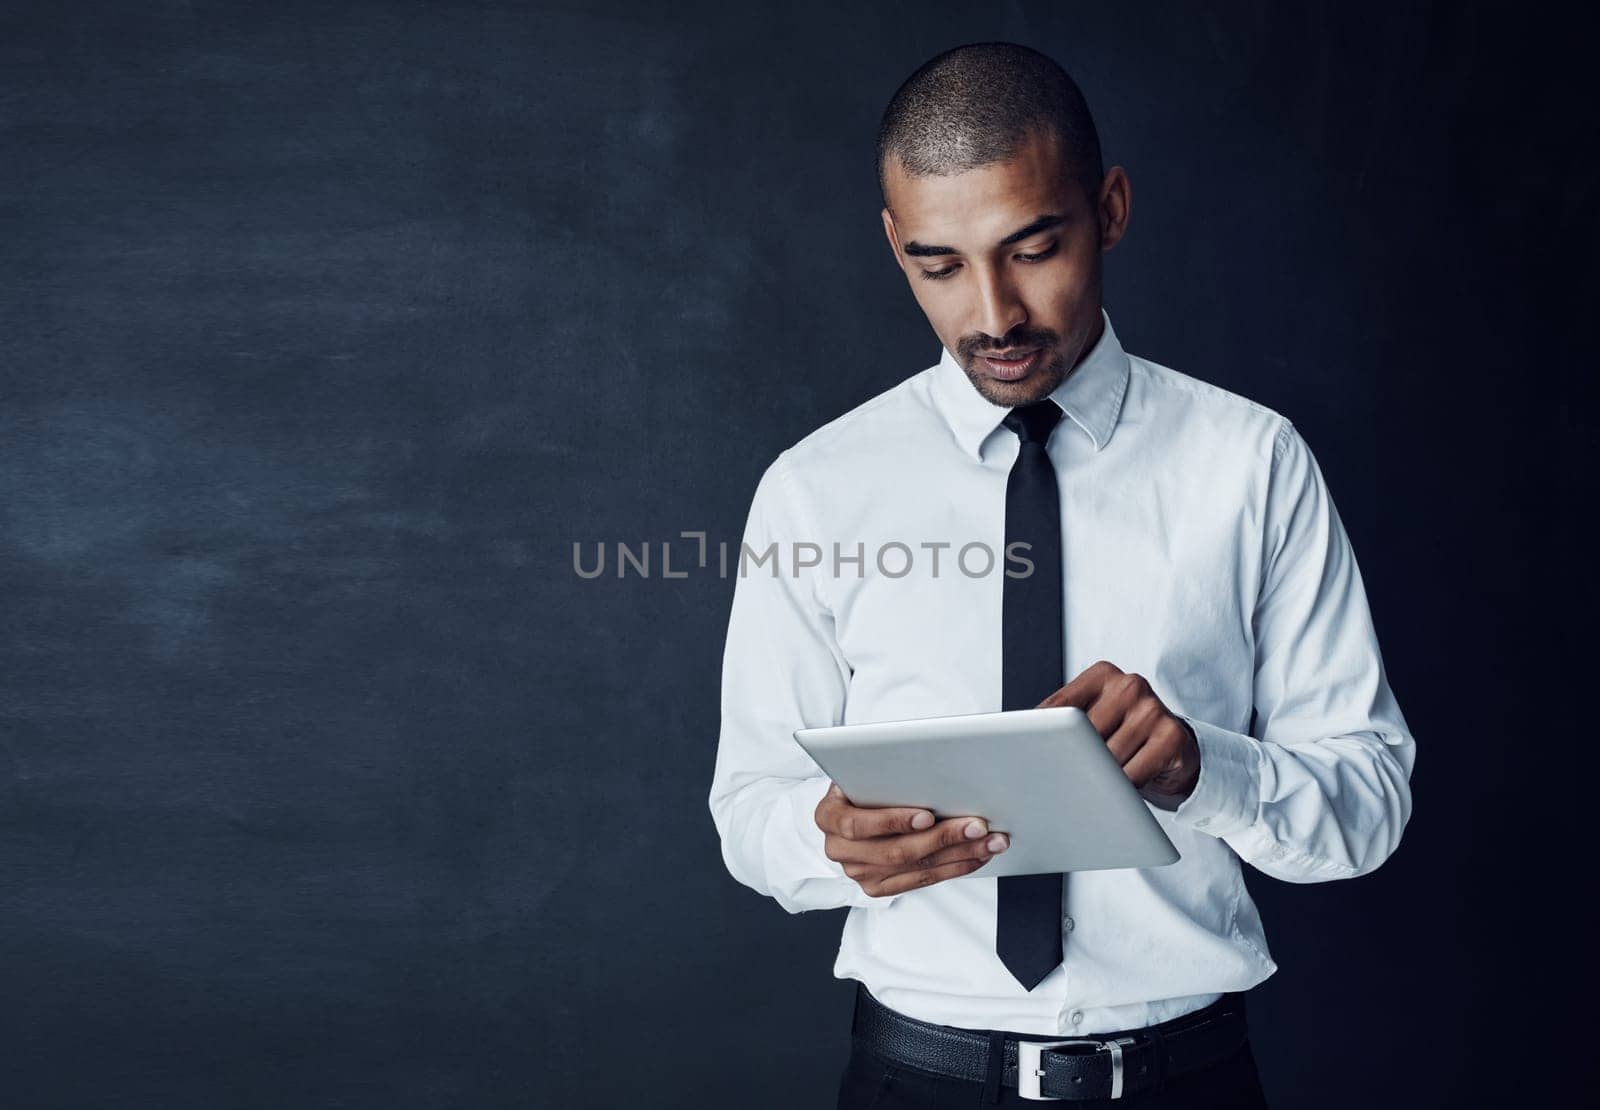 There to help you take care of the hard work. Studio shot of a young businessman using a digital tablet against a dark background. by YuriArcurs